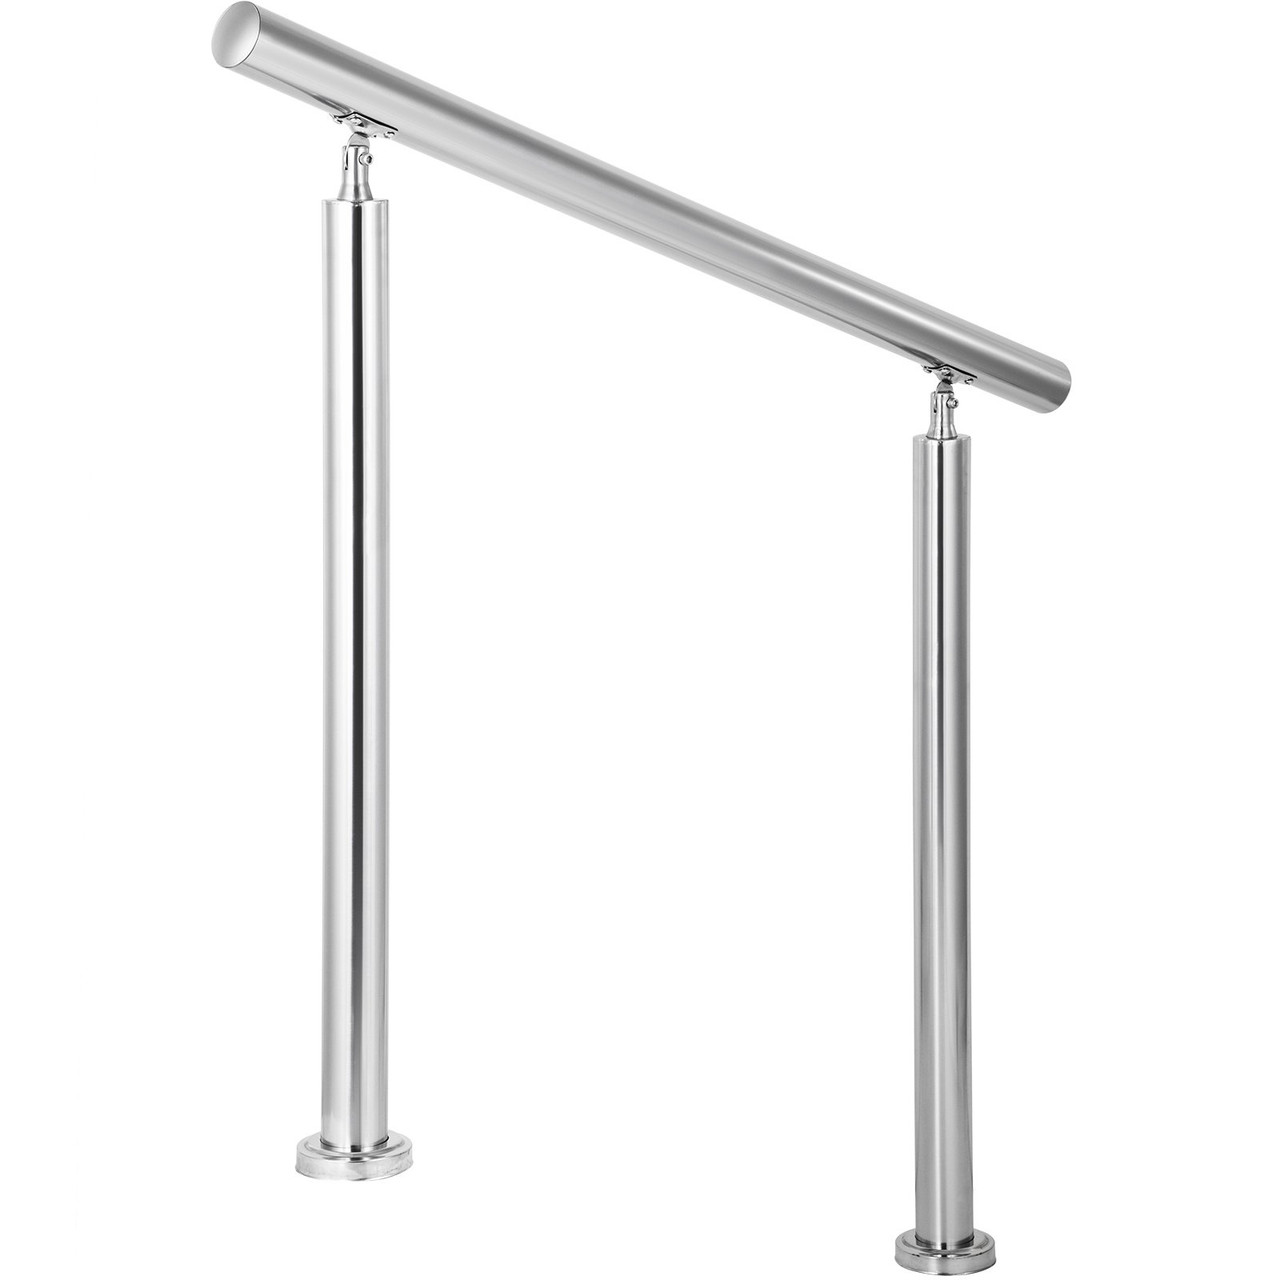 Stainless Steel Handrail 551LBS Load Handrail for Outdoor Steps 32x34" Outdoor Stair Railing Silver Stair Handrail Transitional Range from 0 to 90° Stair Rail Fits 1-2 Steps with Screw Kit